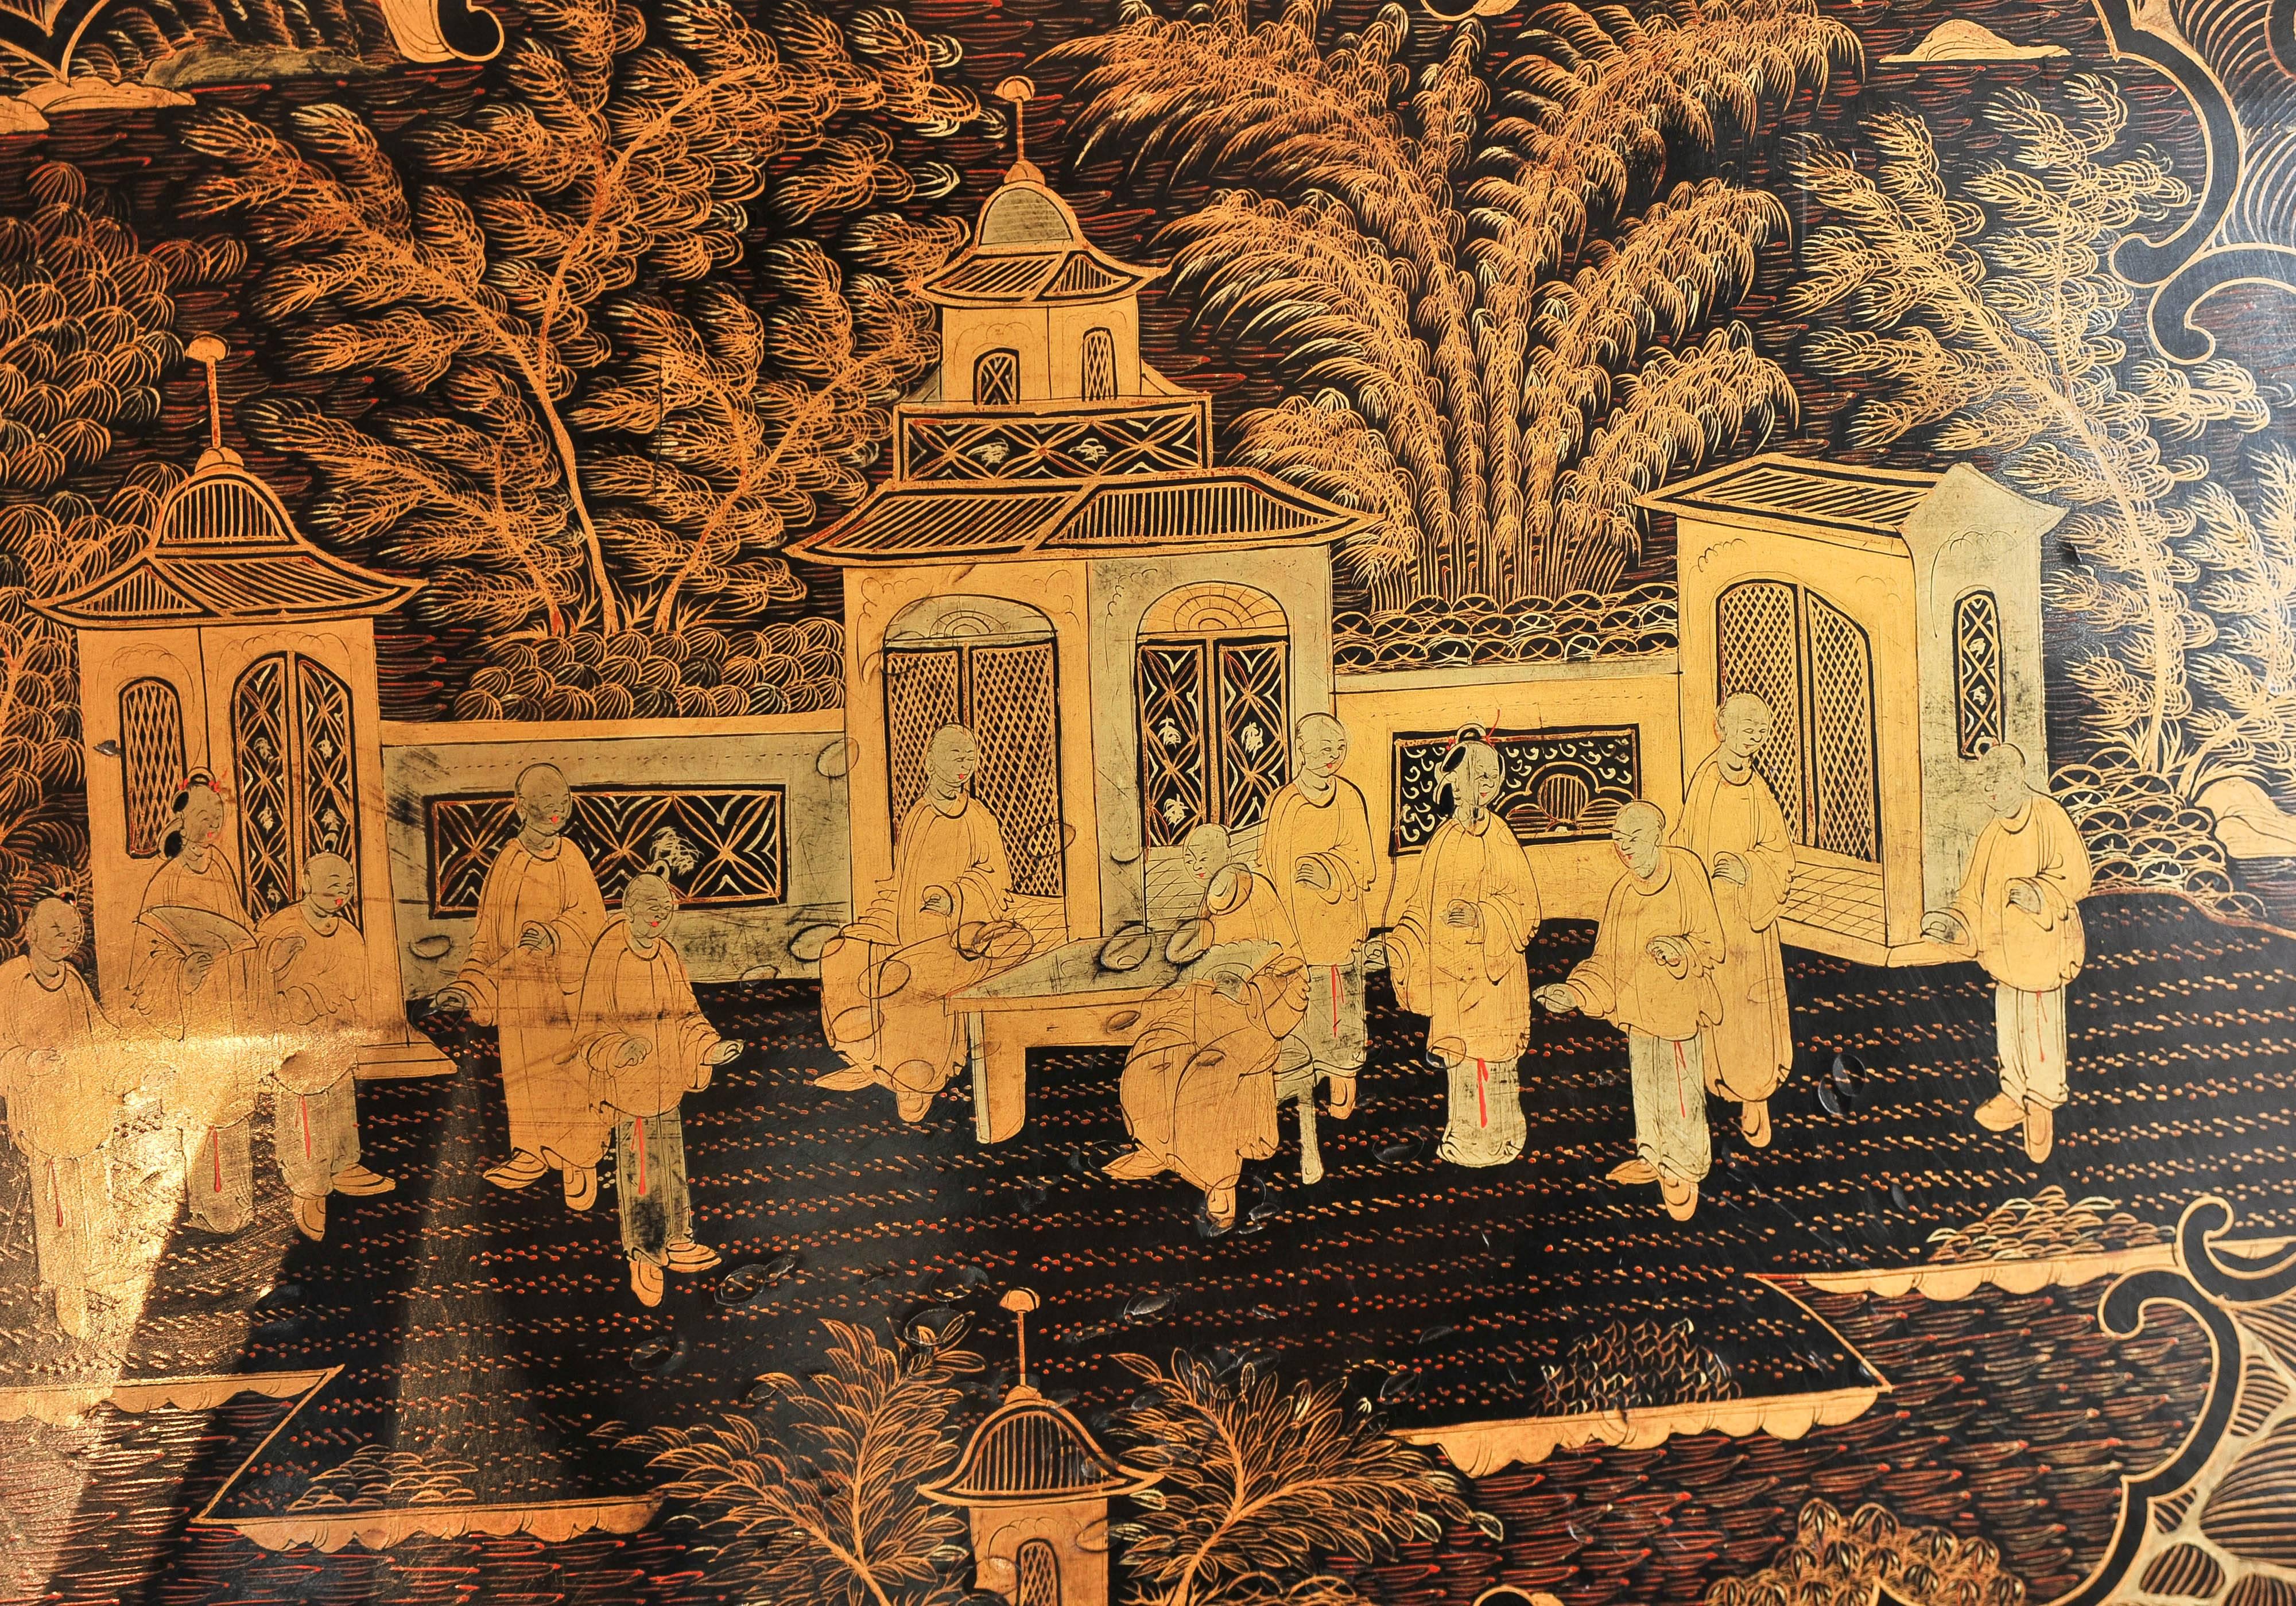 A highly decorative and finely painted Chinese lacquer tray decorated in gold on a black background depicting a large panel with courtiers among an architectural landscape with trees and a foliate border.
The tray has been repaired on the far right